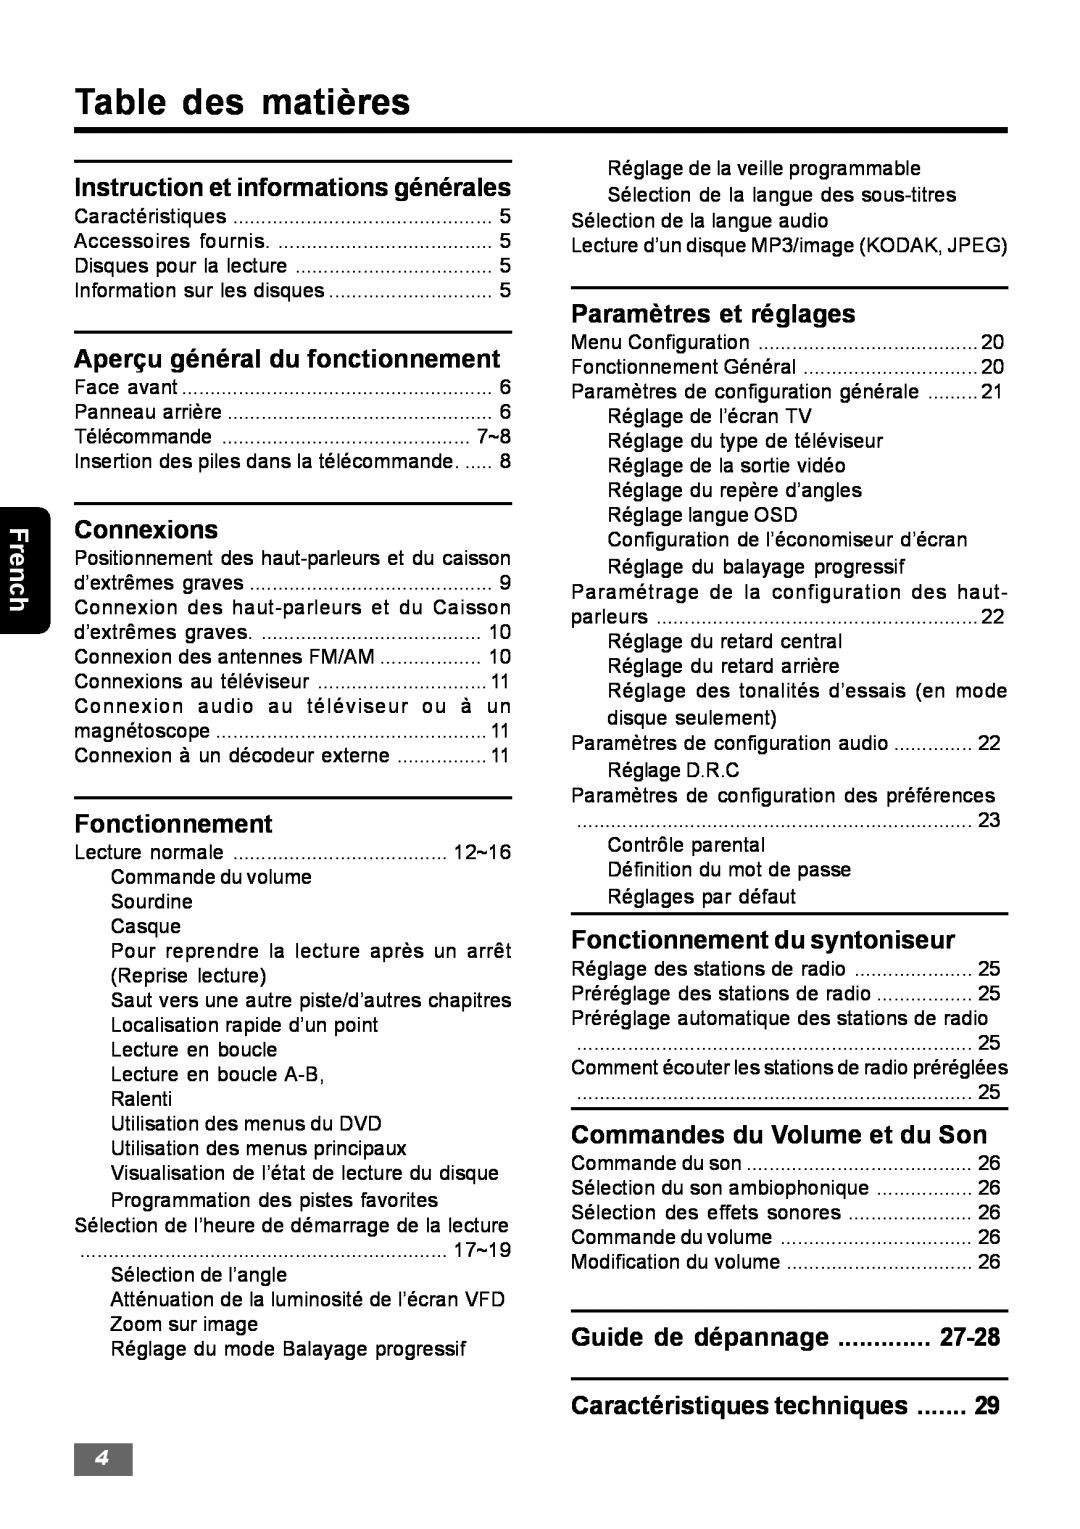 Insignia IS-HTIB102731 owner manual Table des matières, French 